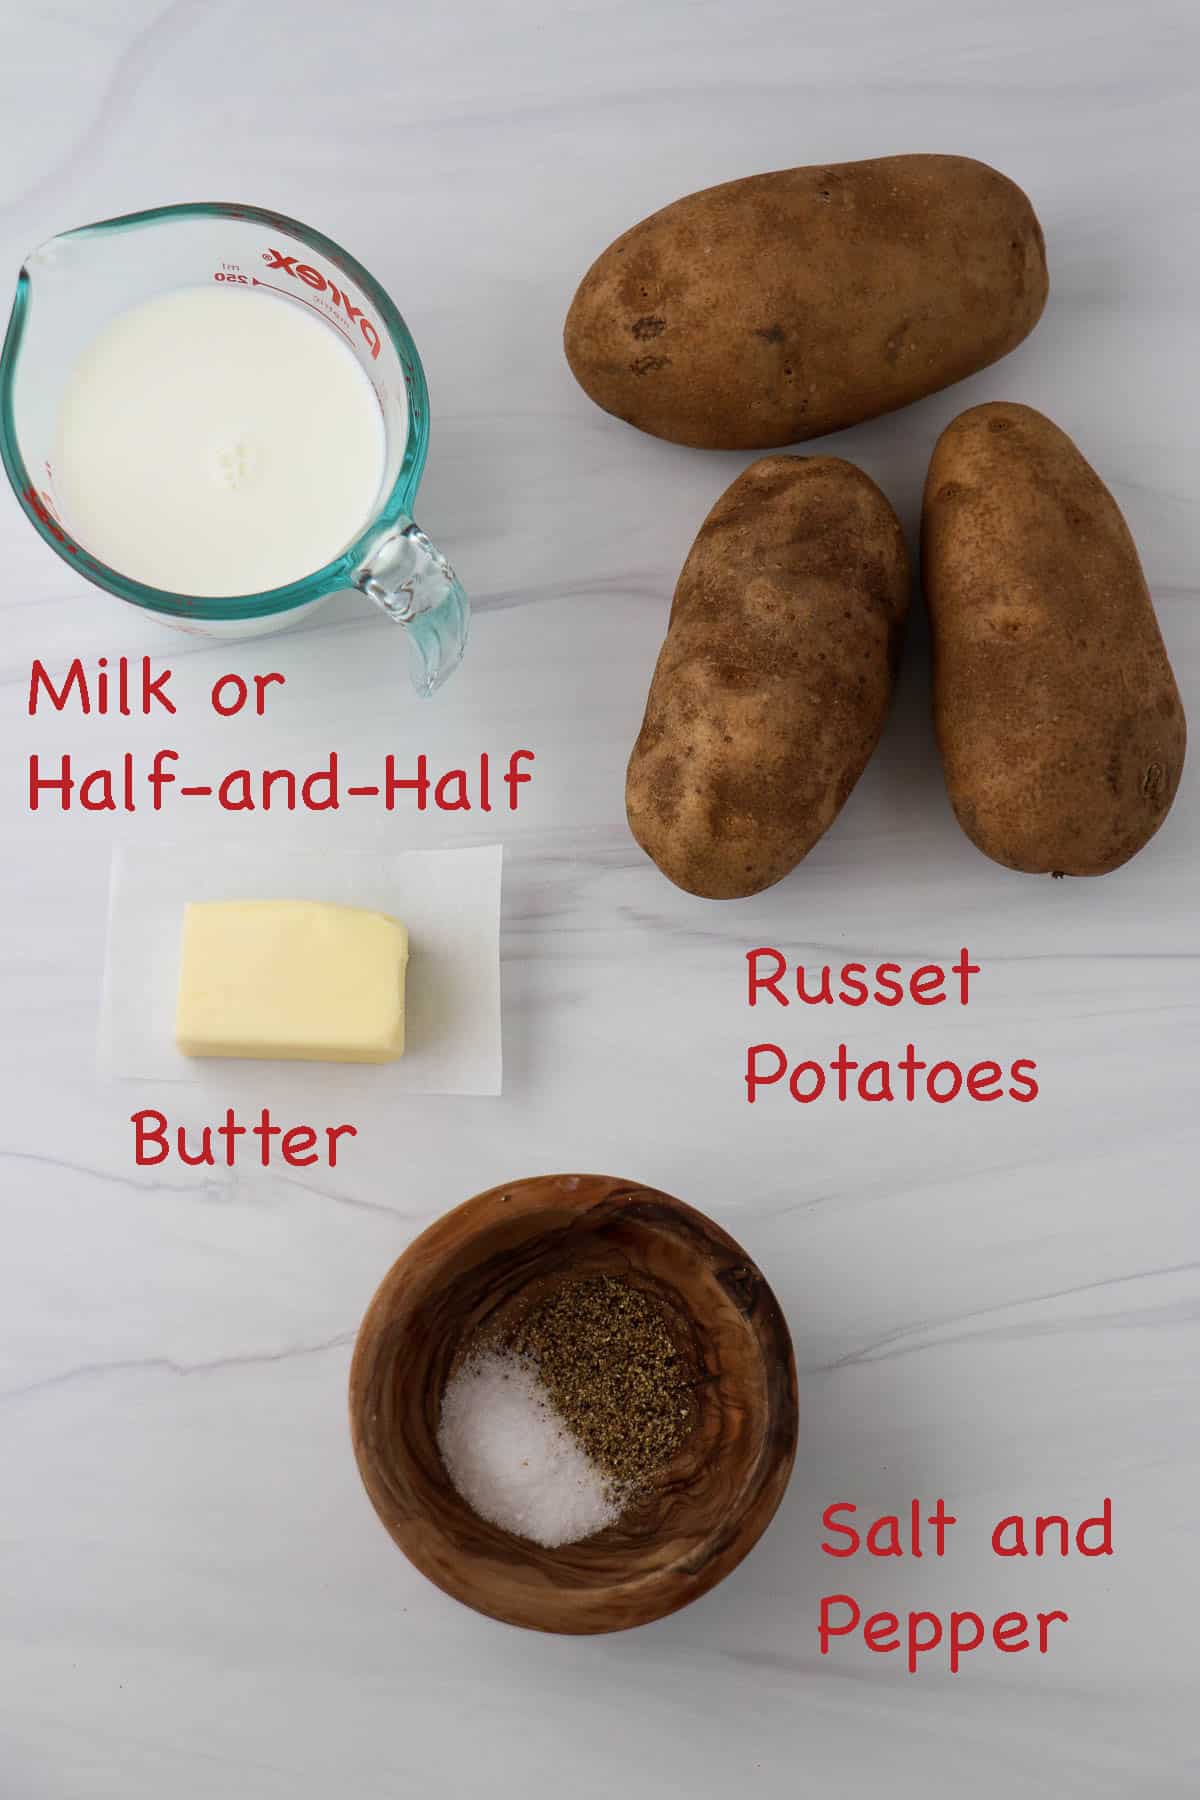 Labeled ingredients for mashed potatoes.